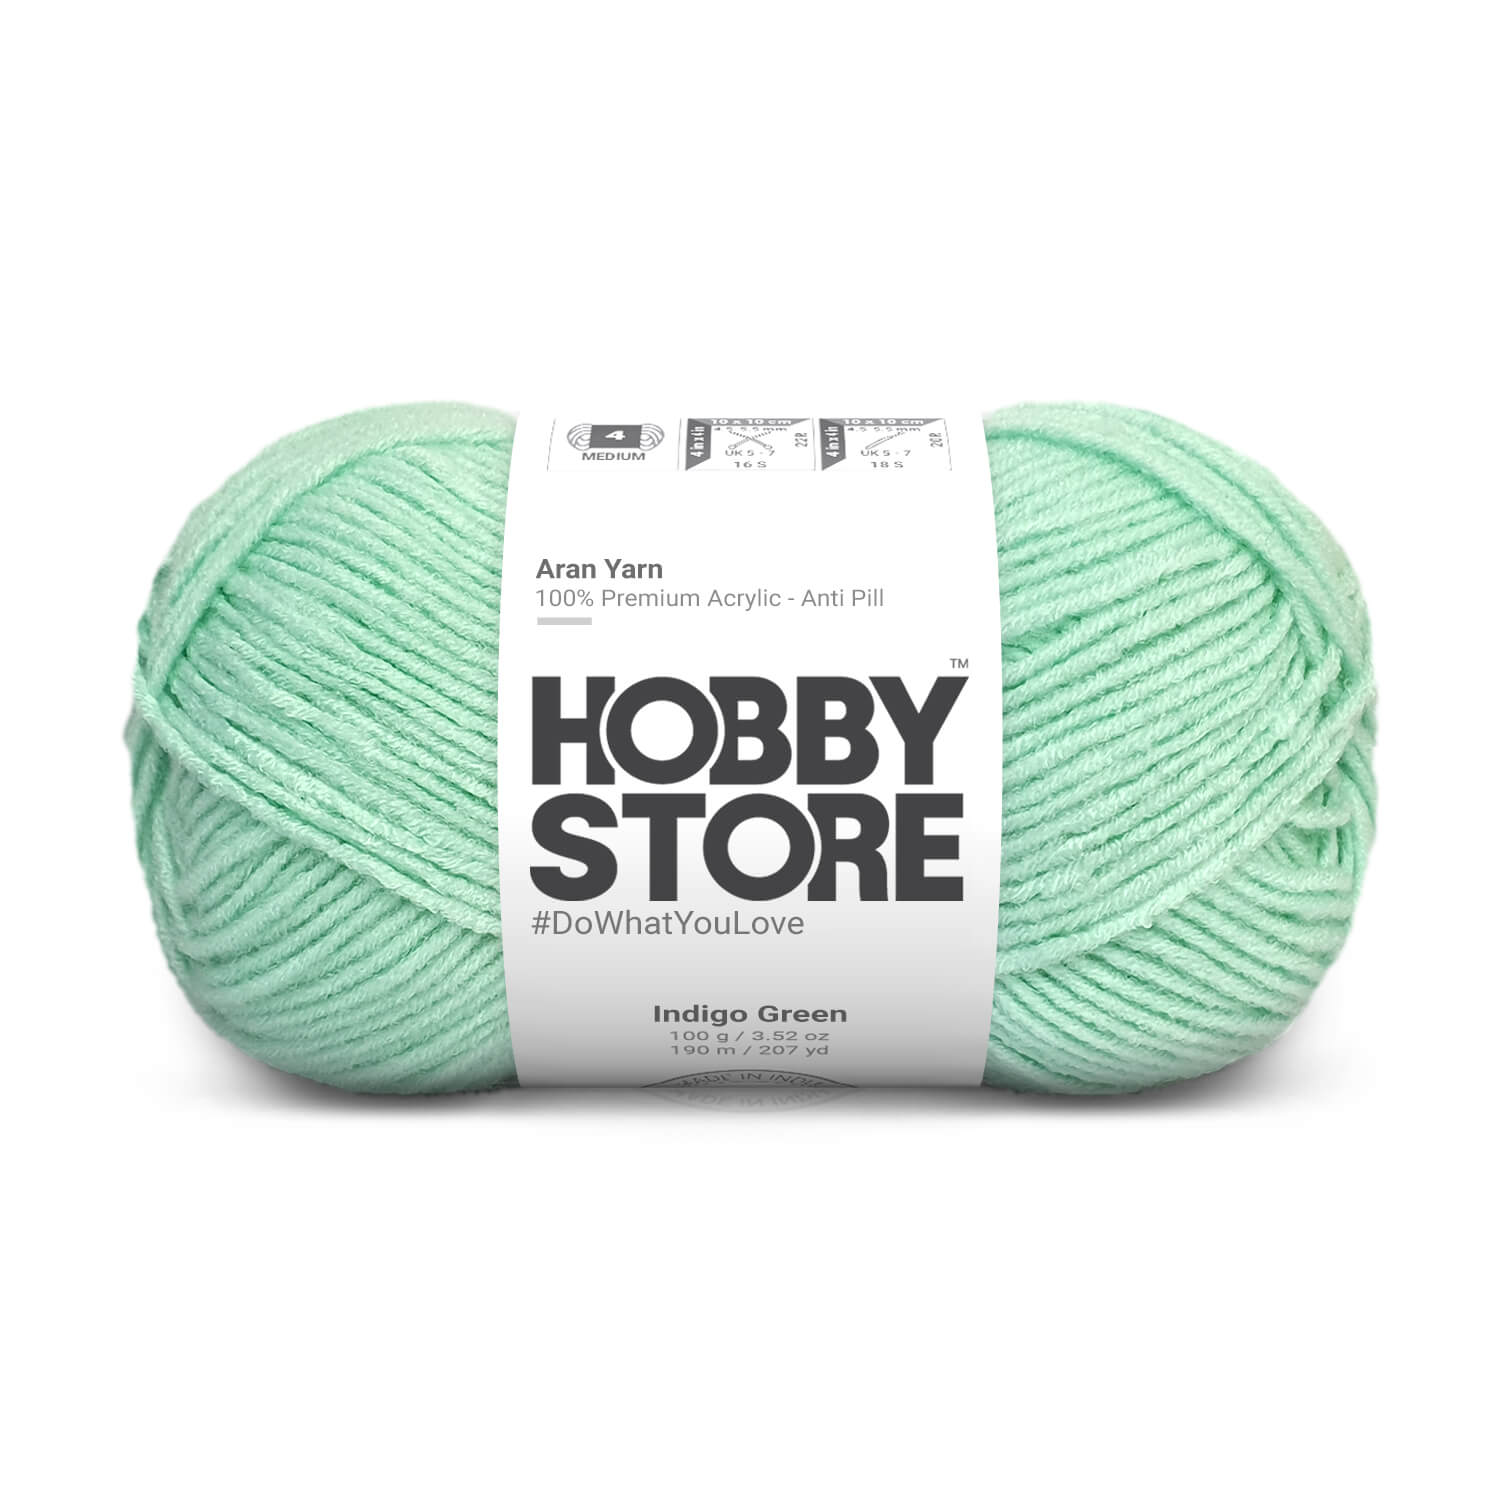 Bulky Yarn by Hobby Store - Dried Rose 6006